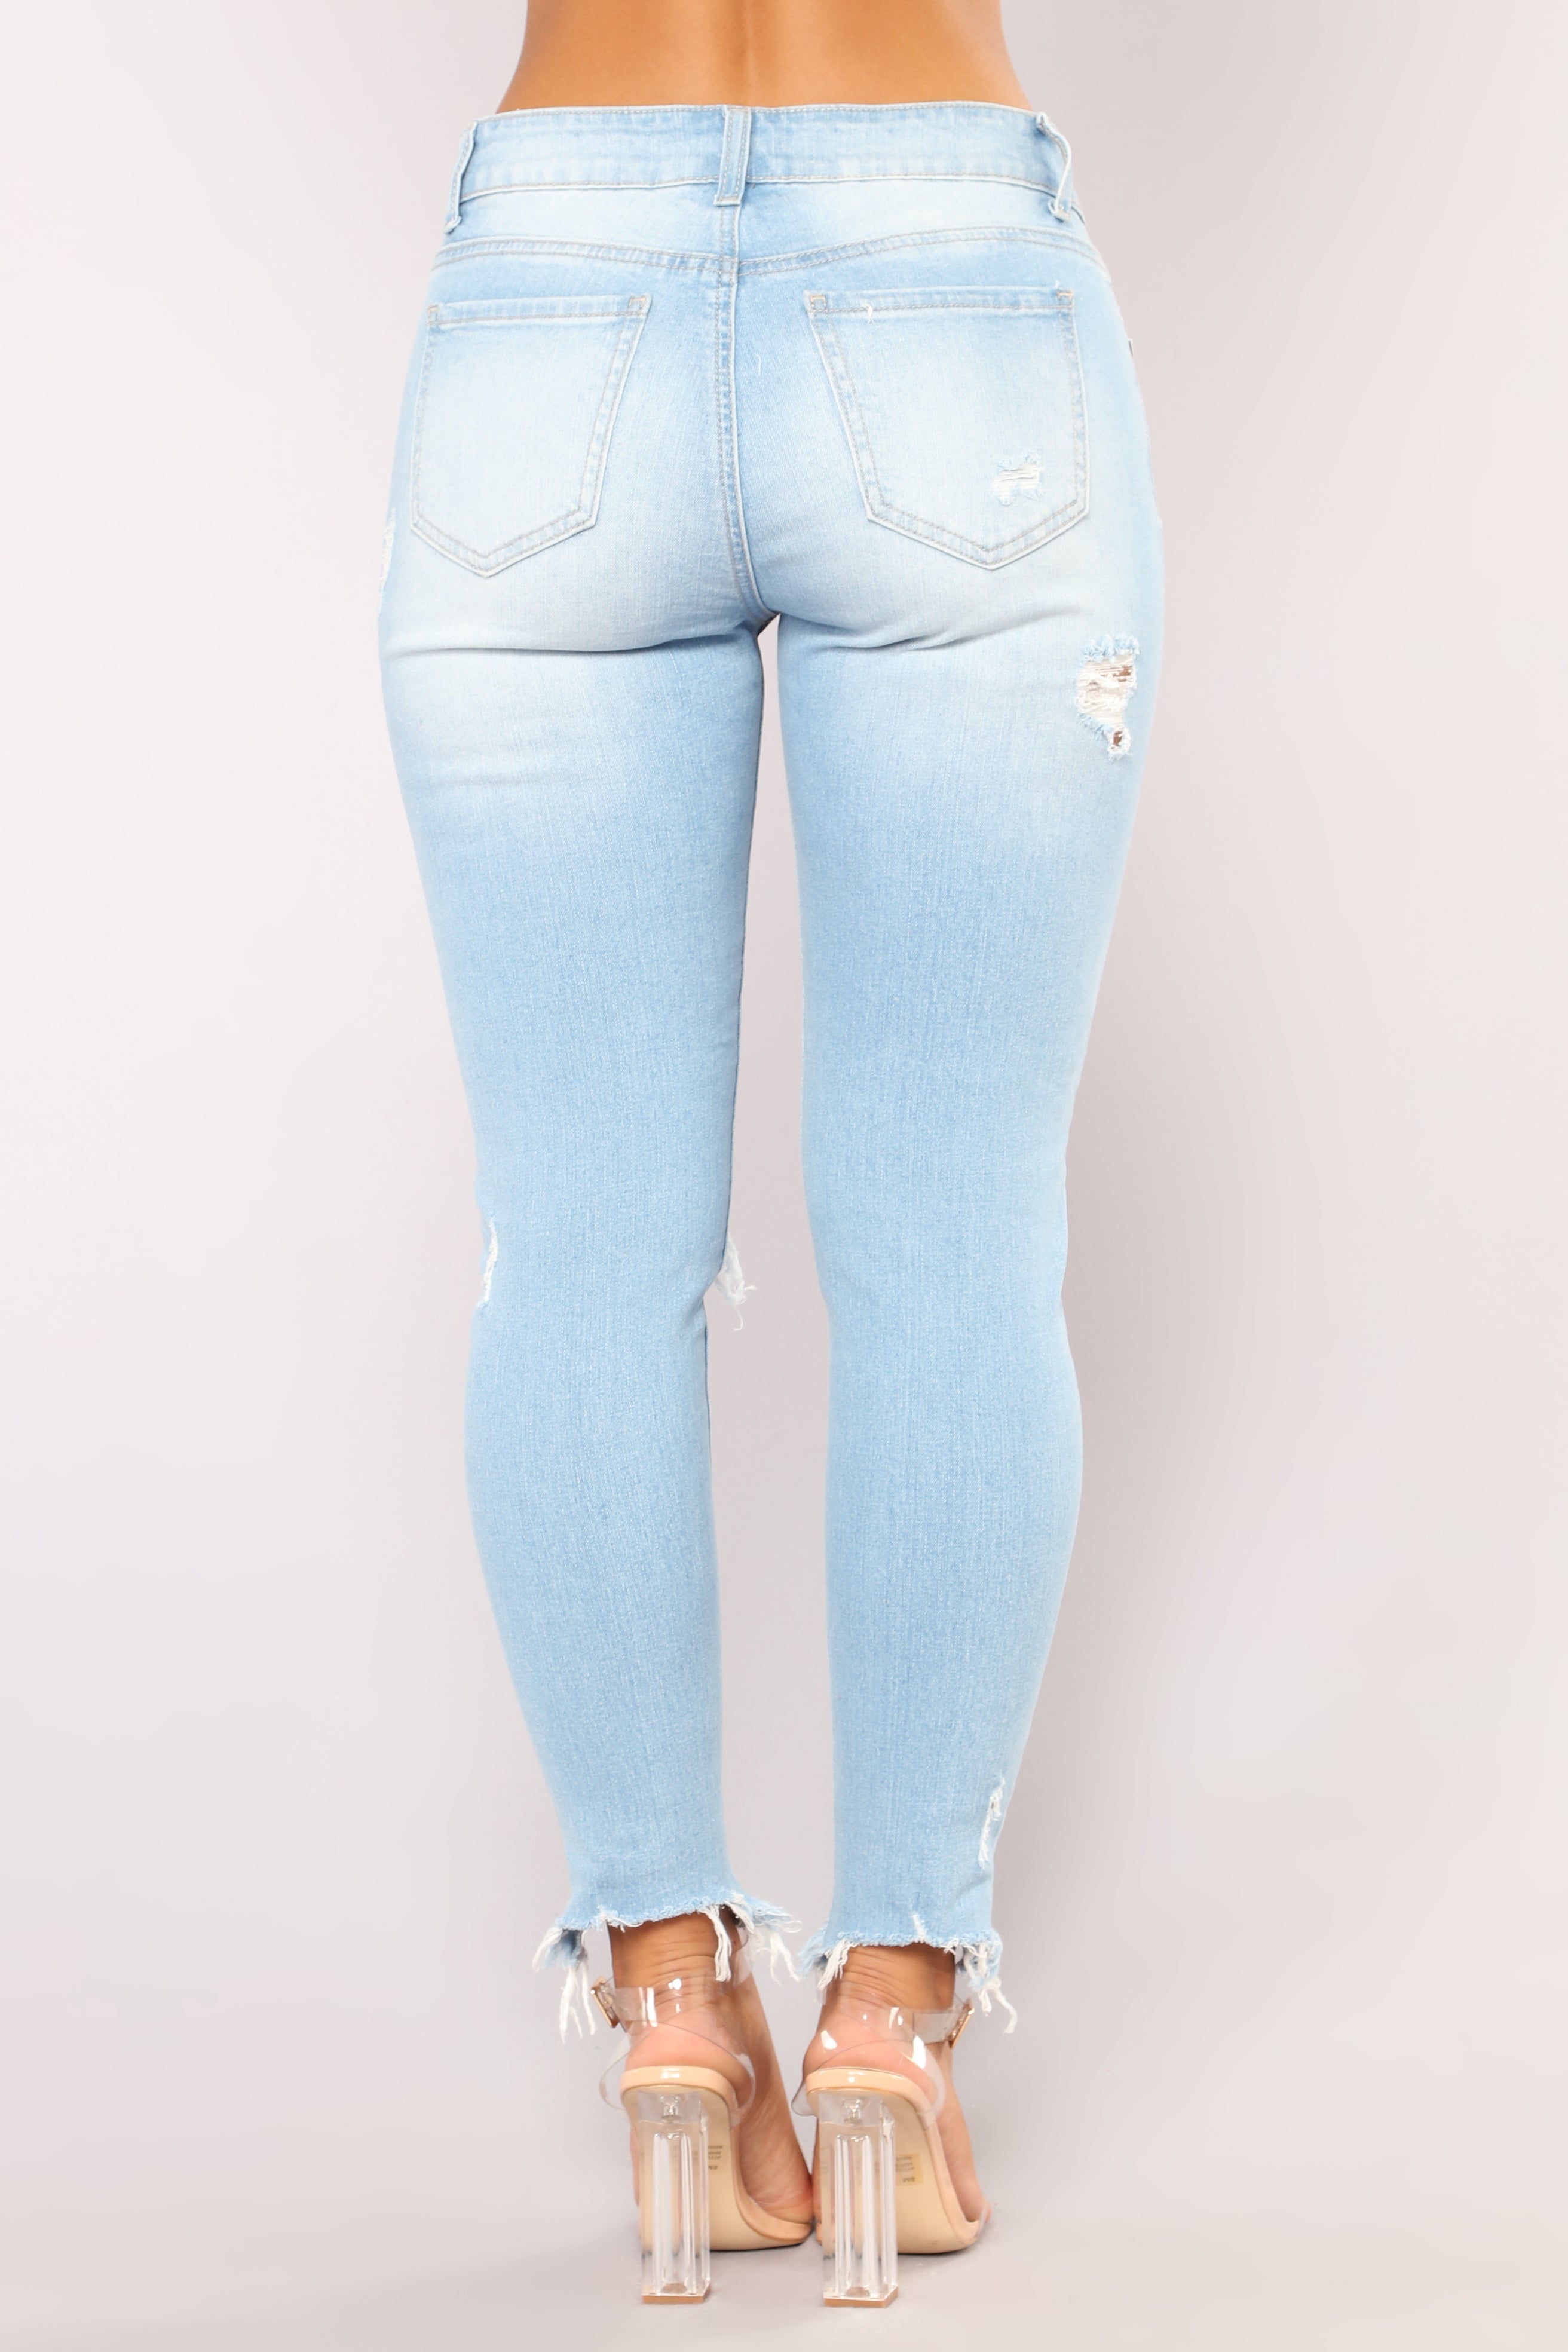 Something About You Ankle Jeans - Light Blue Wash